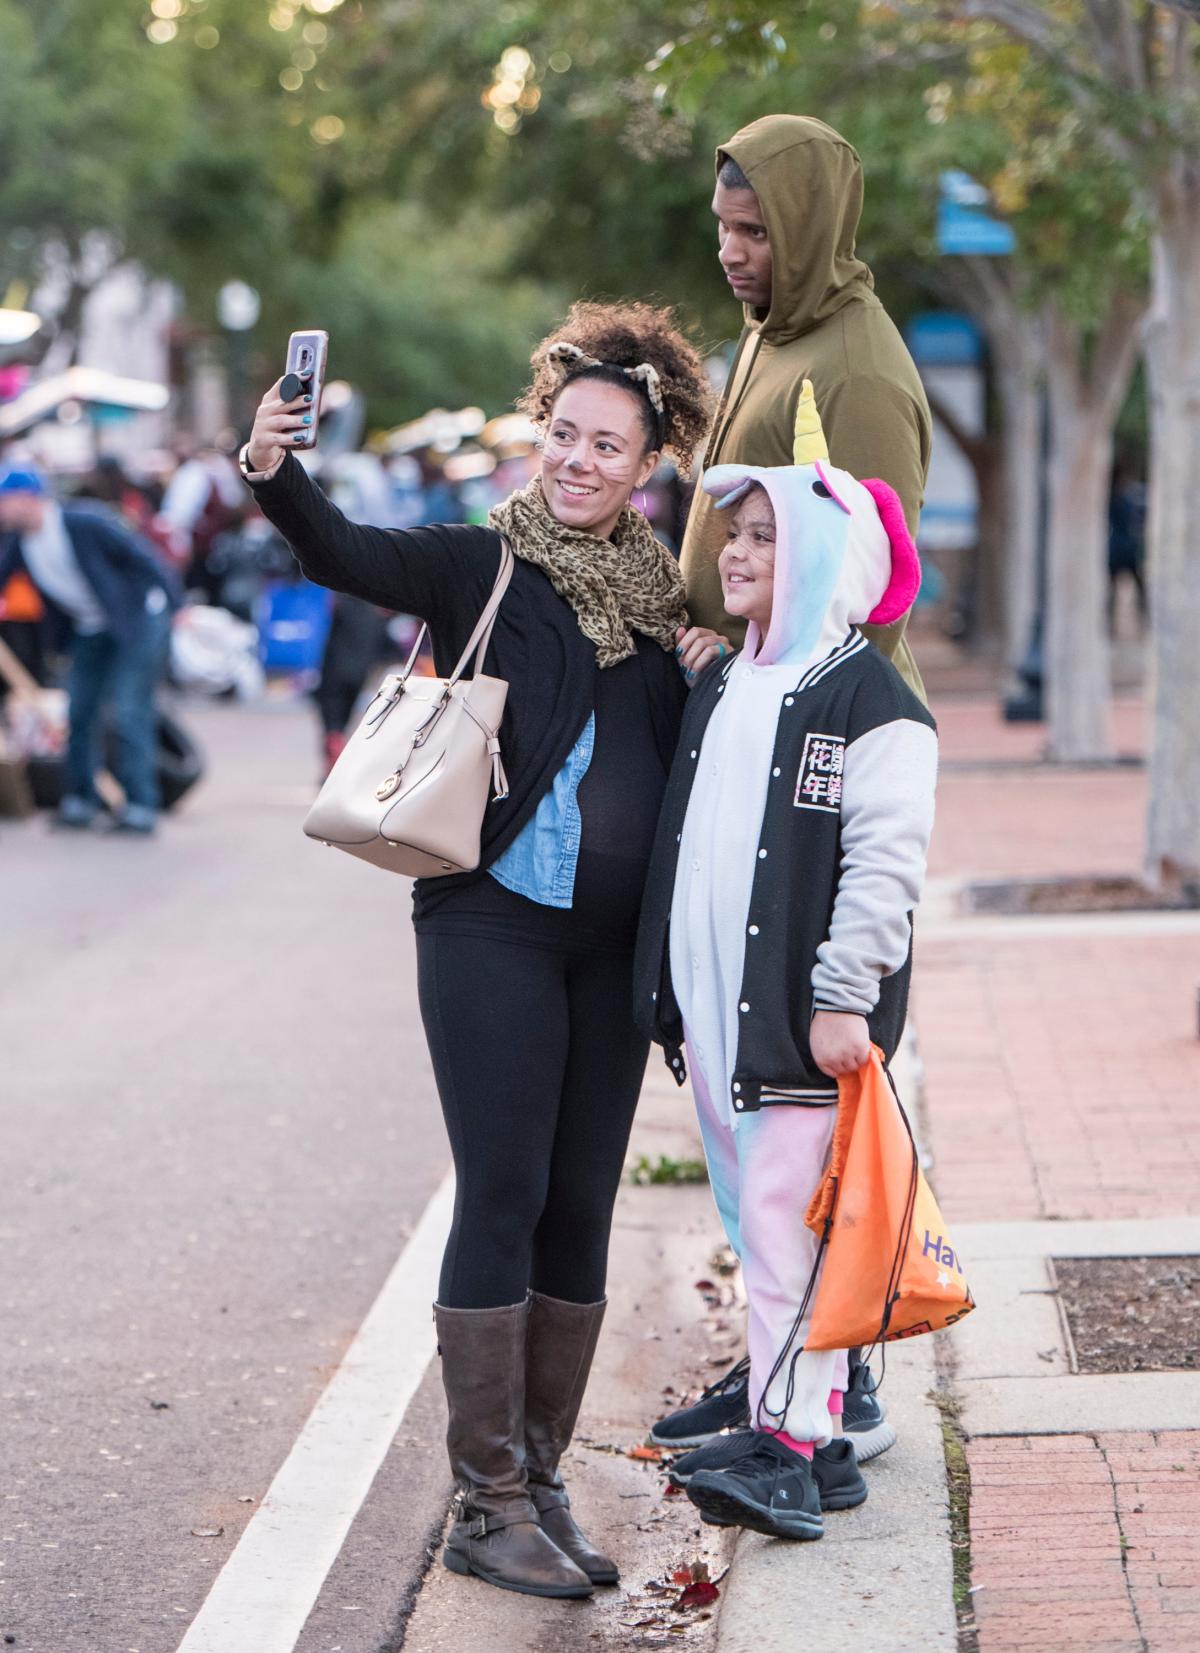 Familyfriendly Halloween events in Pensacola From trunkortreats to